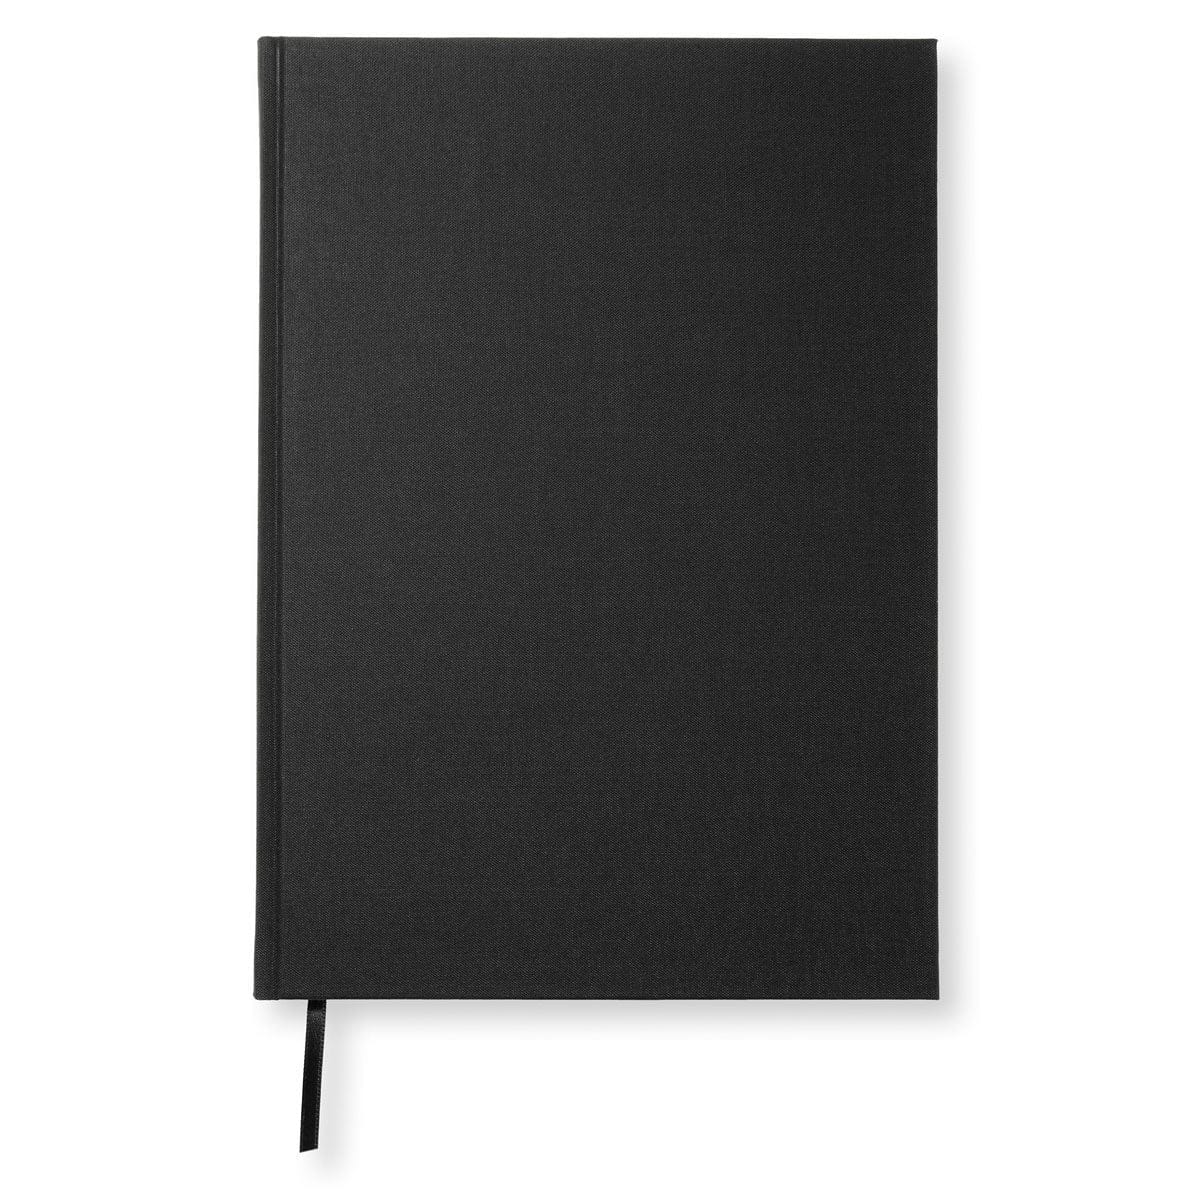 PaperStyle Paperstyle NOTEBOOK A5 256p. Ruled Black